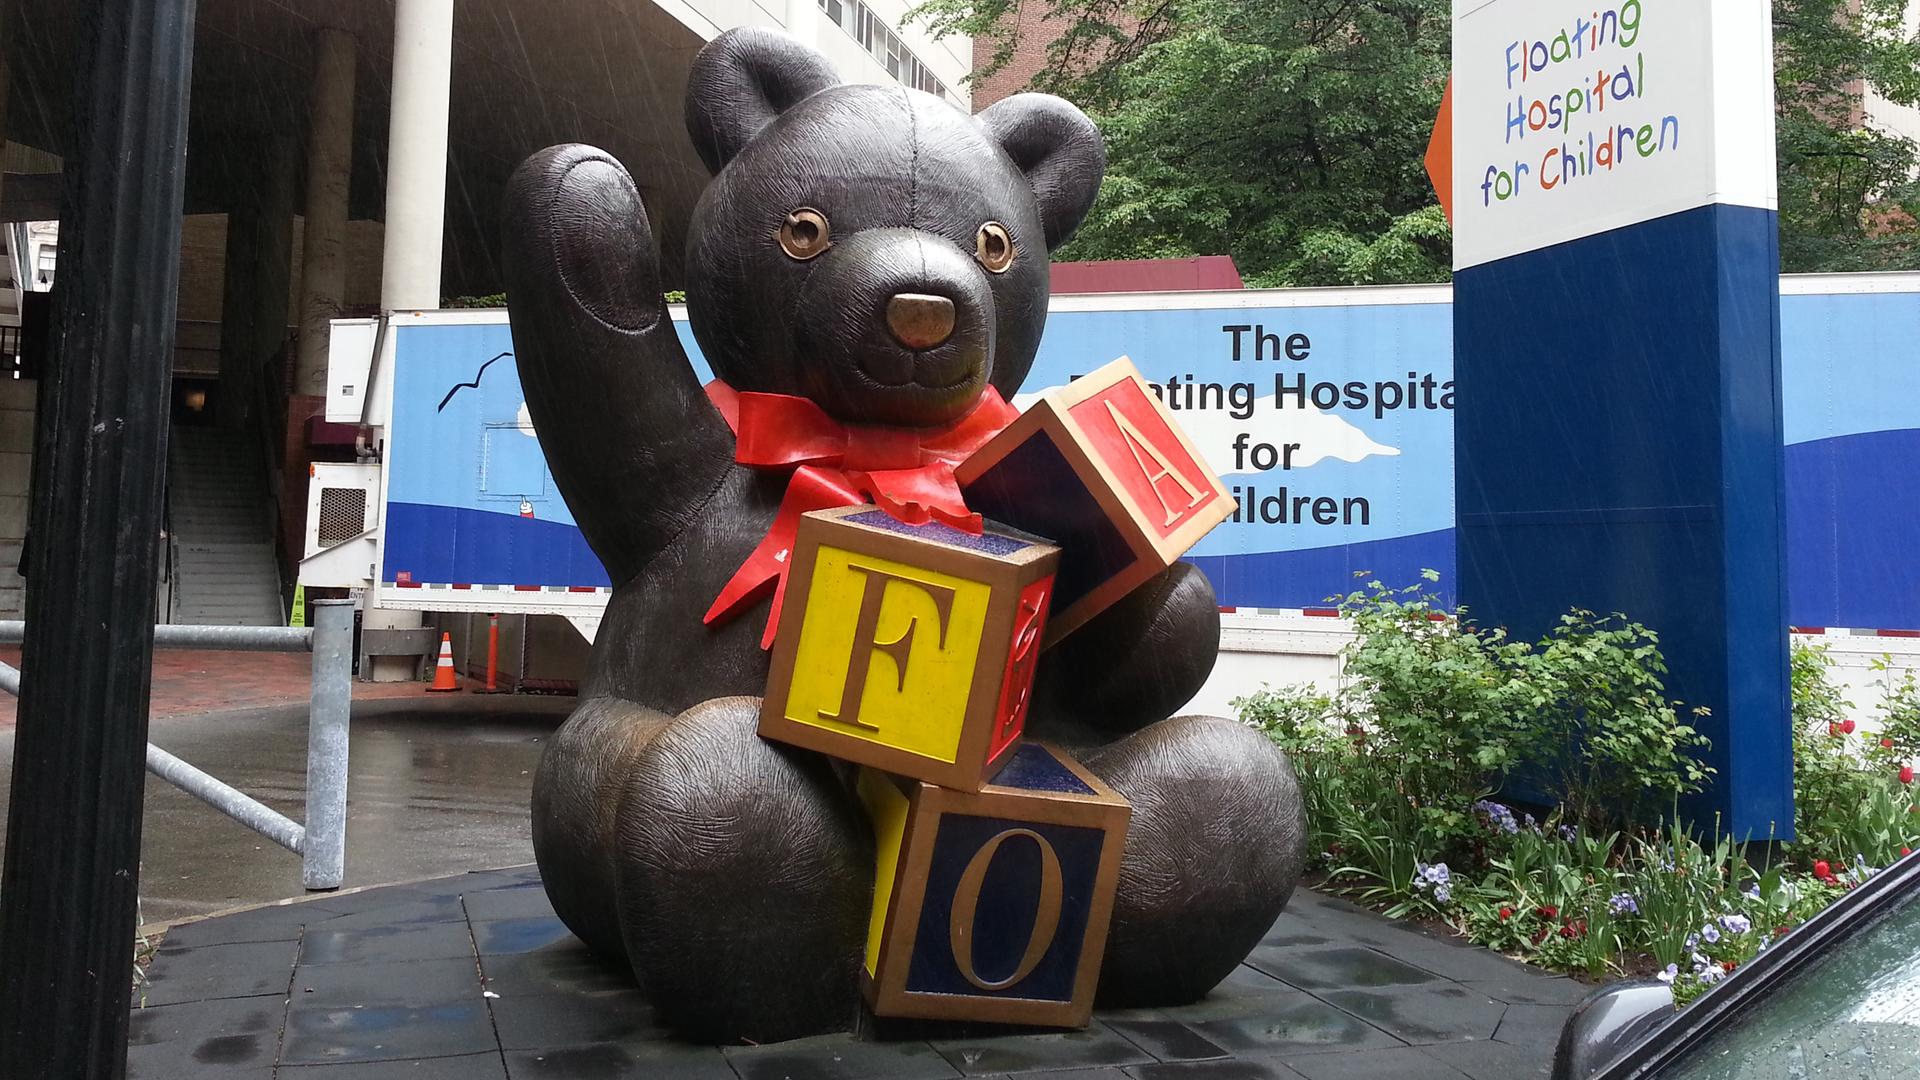 The FAO Schwarz bear landed at the Floating Hospital for Children at the Tufts Medical Center after the company's Boston store was closed in 2004.